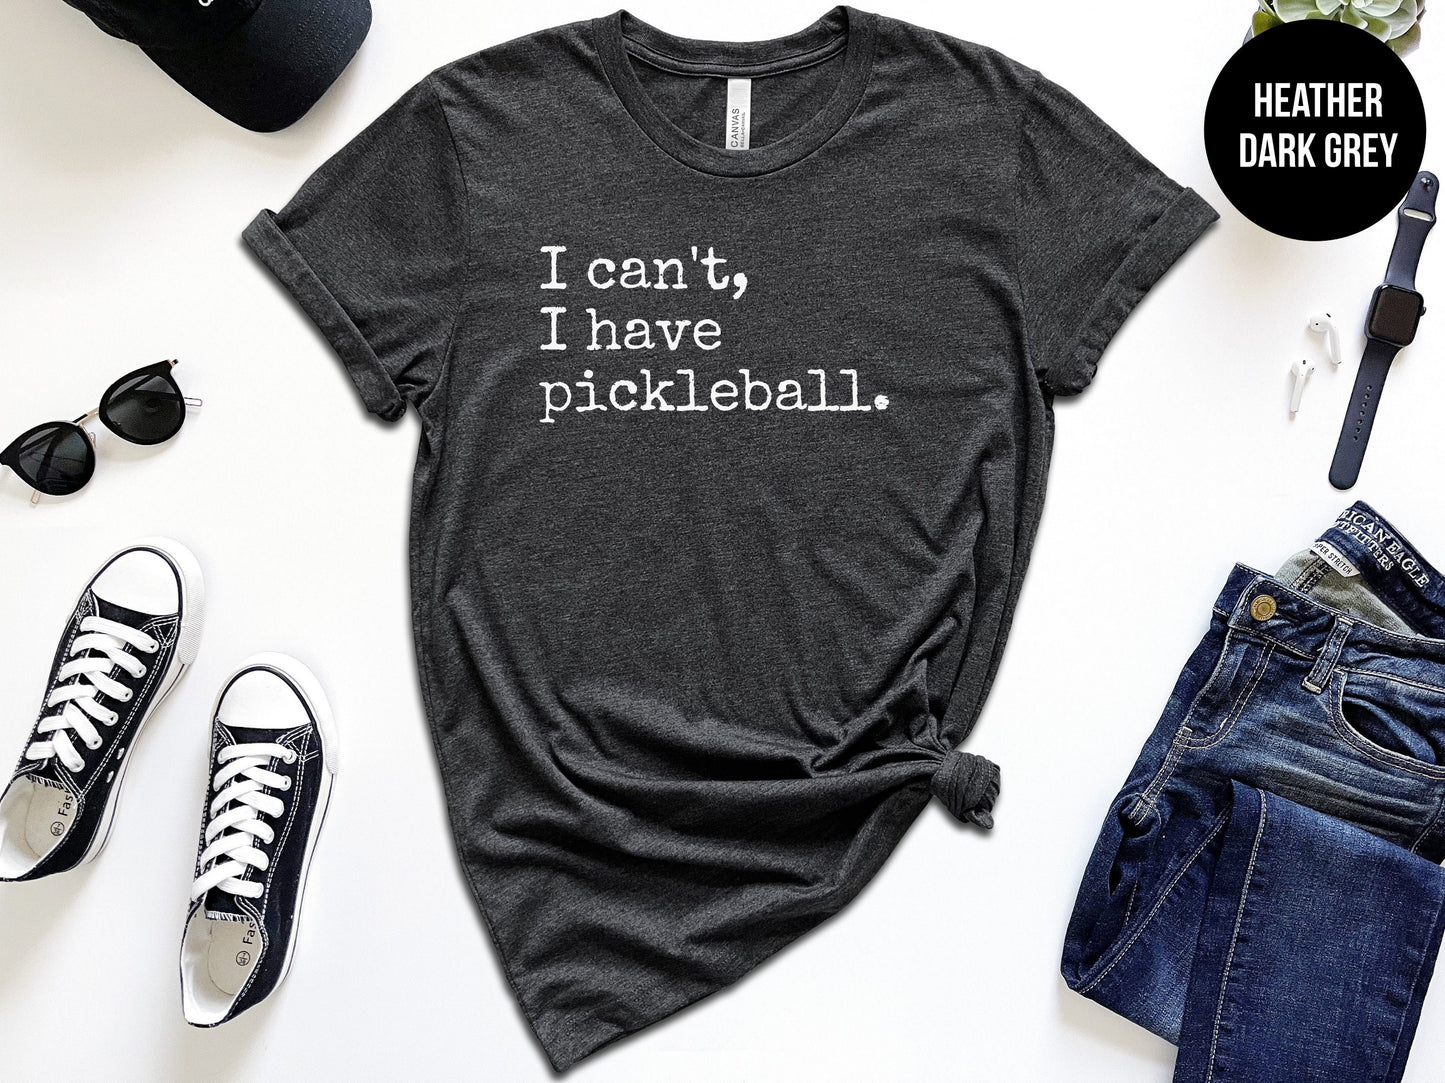 I Can't, I Have Pickleball